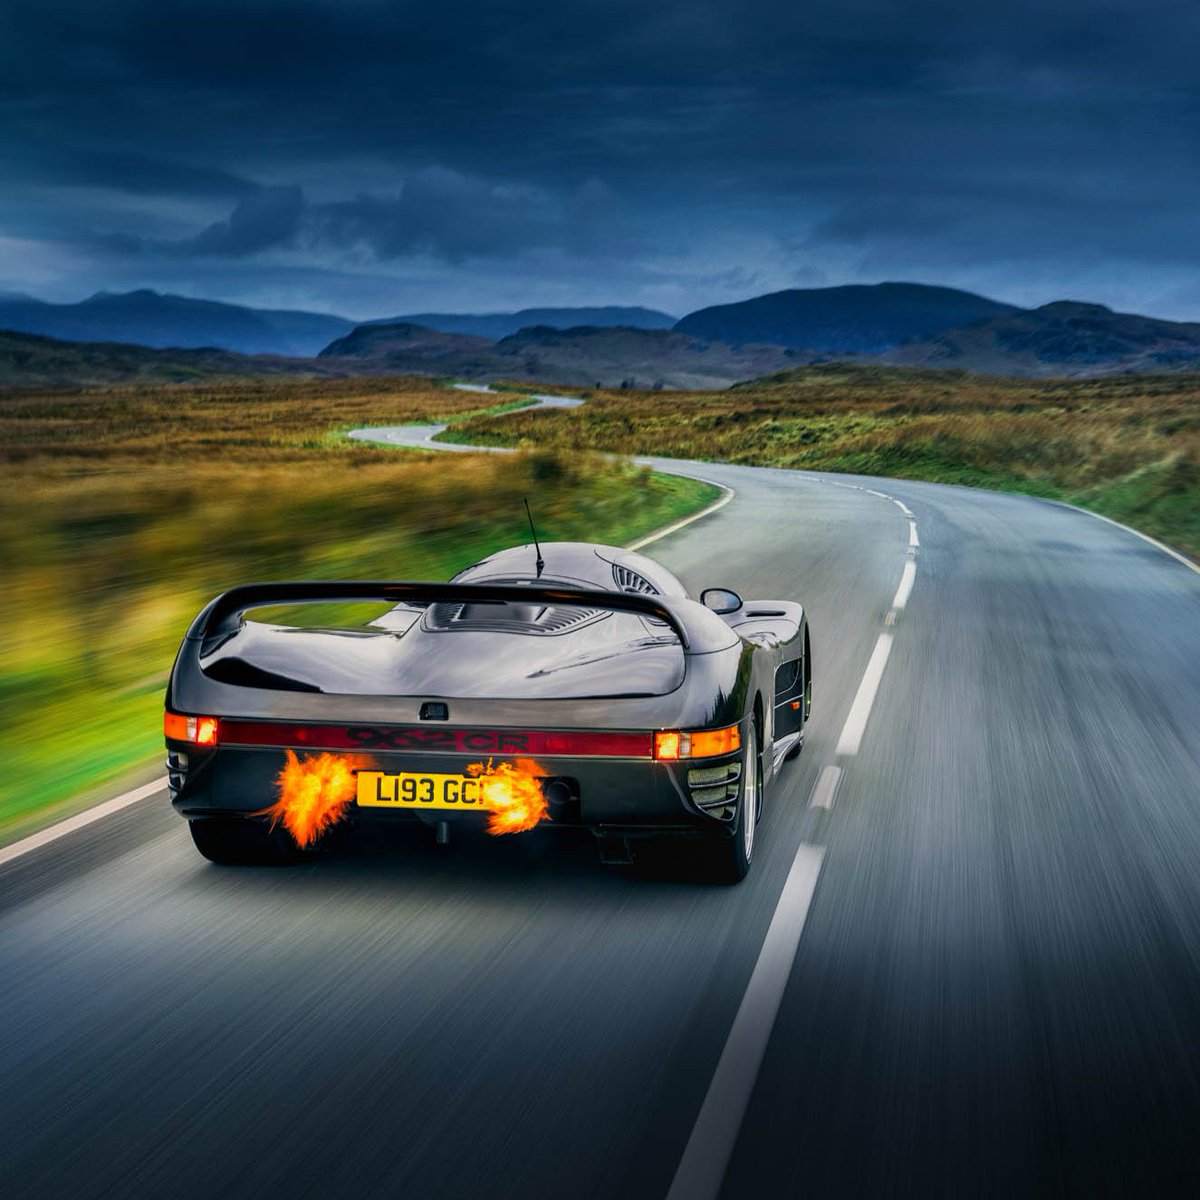 In the May issue, @DickieMeaden gets behind the wheel of the Schuppan-Porsche 962 CR: a road-legal, race-bred unicorn. Pick up a copy to read the most extensive ever test of this legend: bit.ly/Octane-251 📷 @AstonParrott